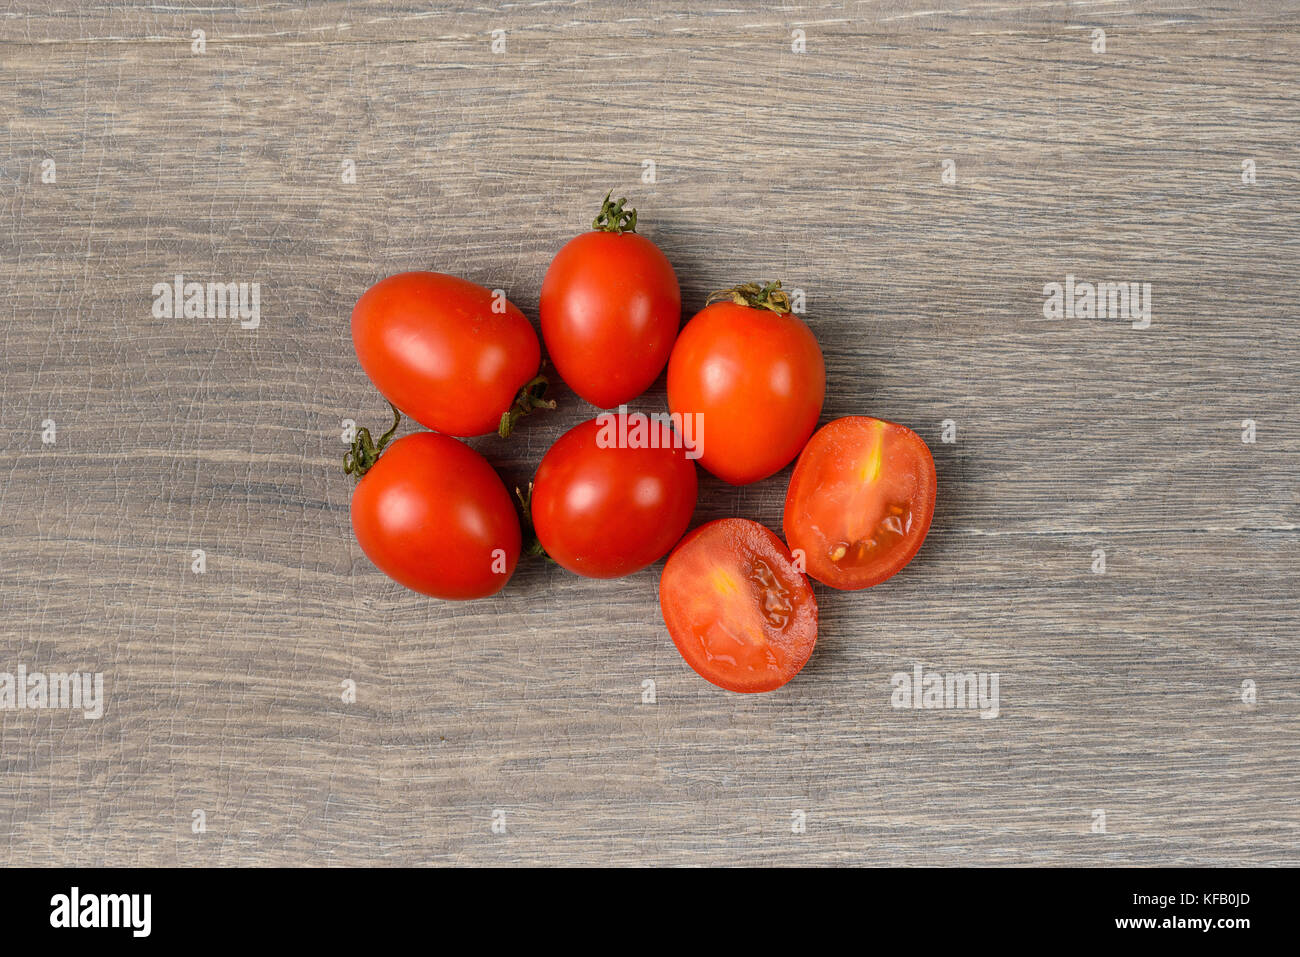 Tomatoes scattered on wooden table Stock Photo